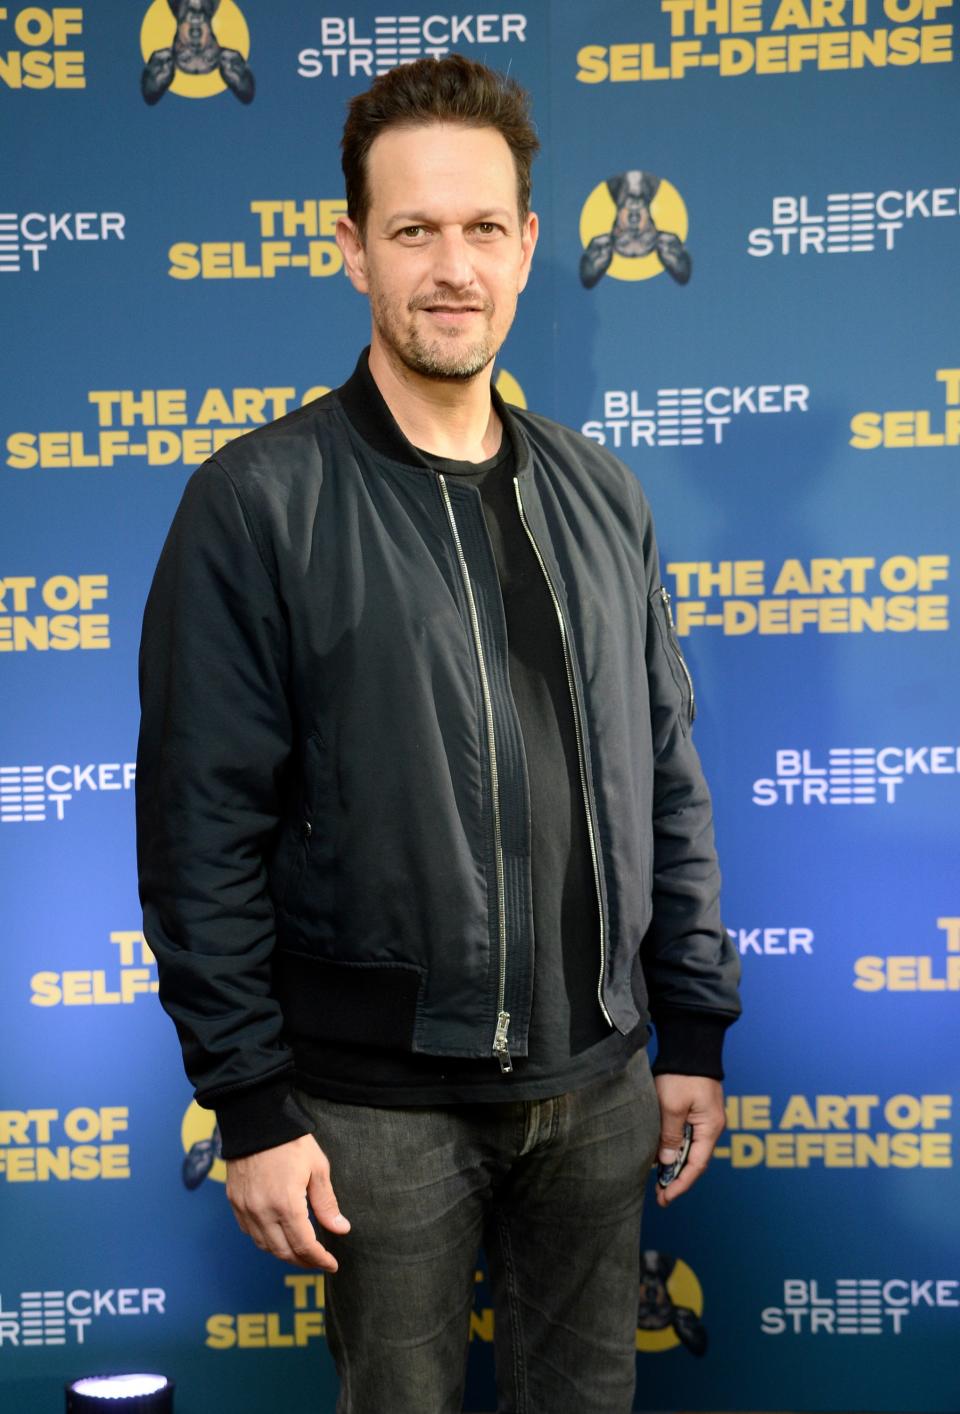 Josh Charles at arrivals for THE ART OF SELF-DEFENSE Special Screening, Alamo Drafthouse, Brooklyn, NY July 11, 2019. Photo By: Eli Winston/Everett Collection